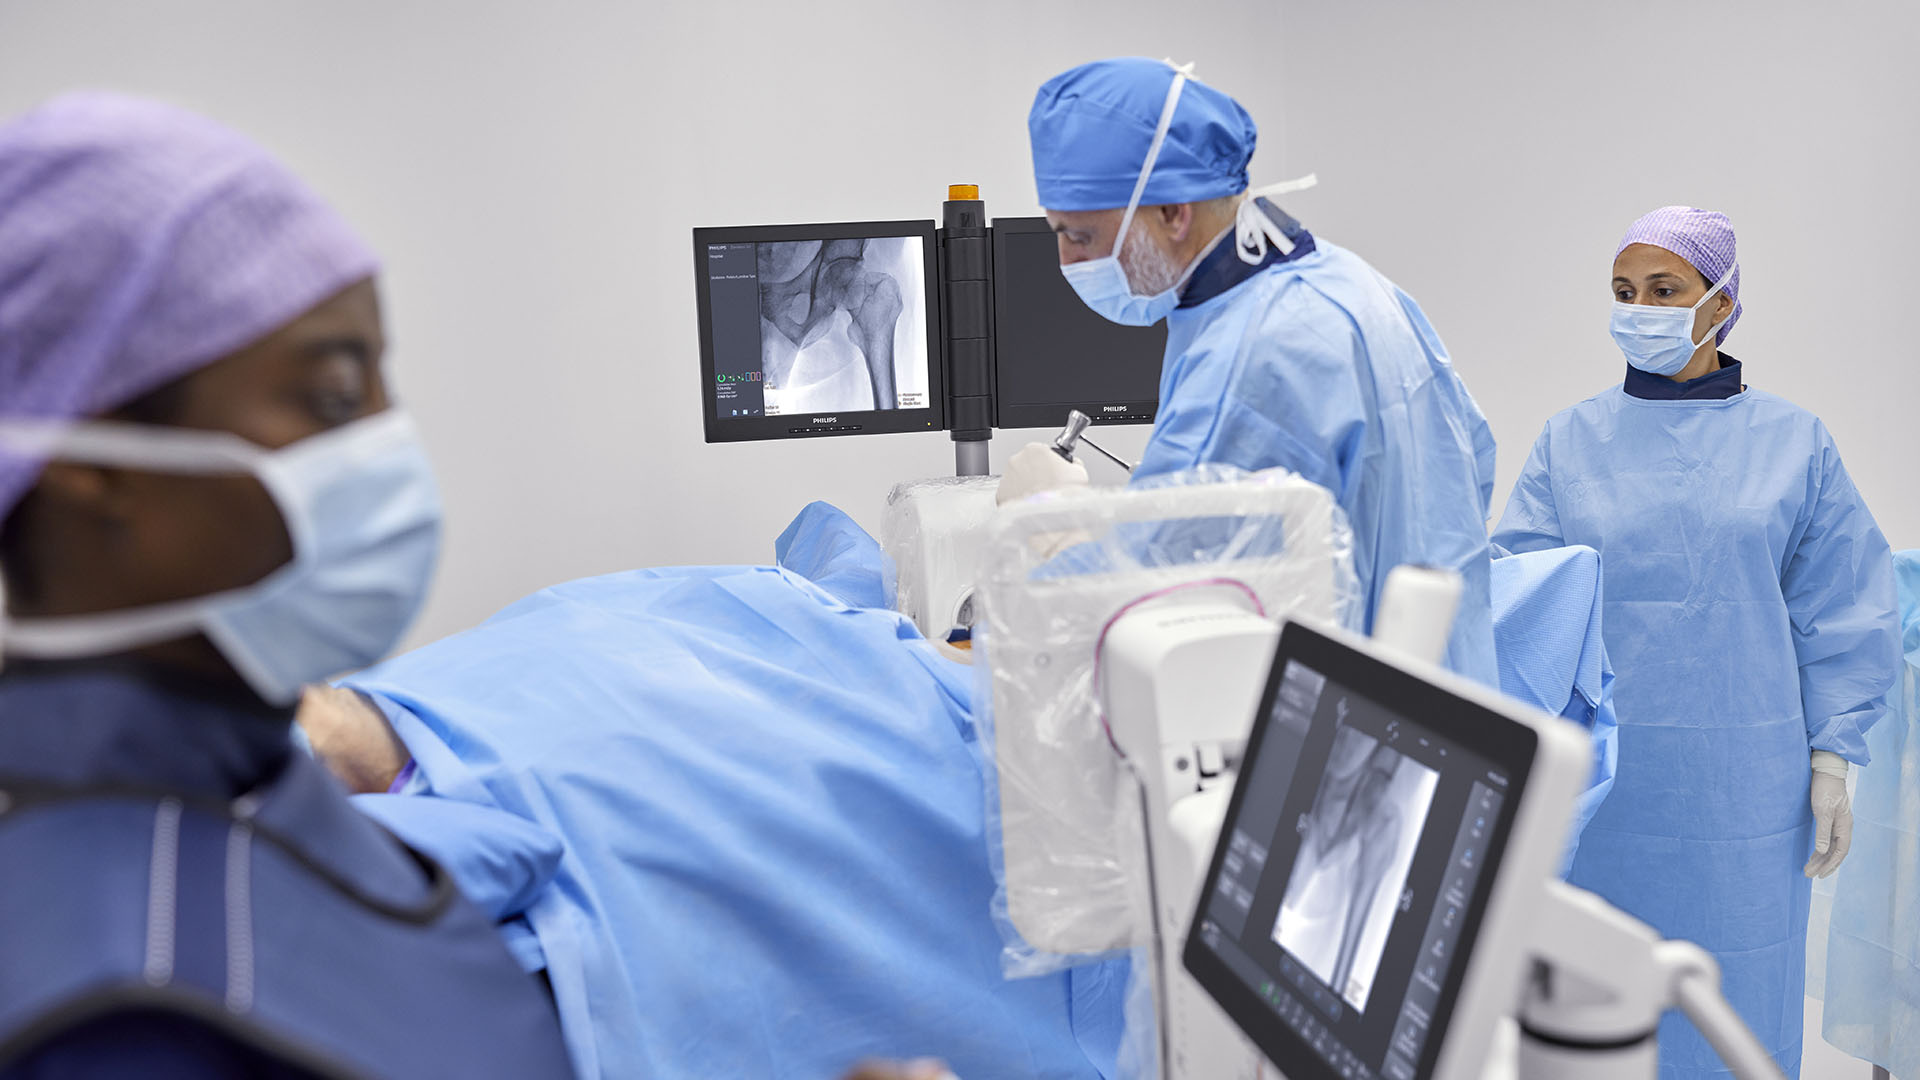 Philips extends its mobile C-arm range with Zenition 30, alleviating staff shortages by empowering surgeons with greater personalization and control